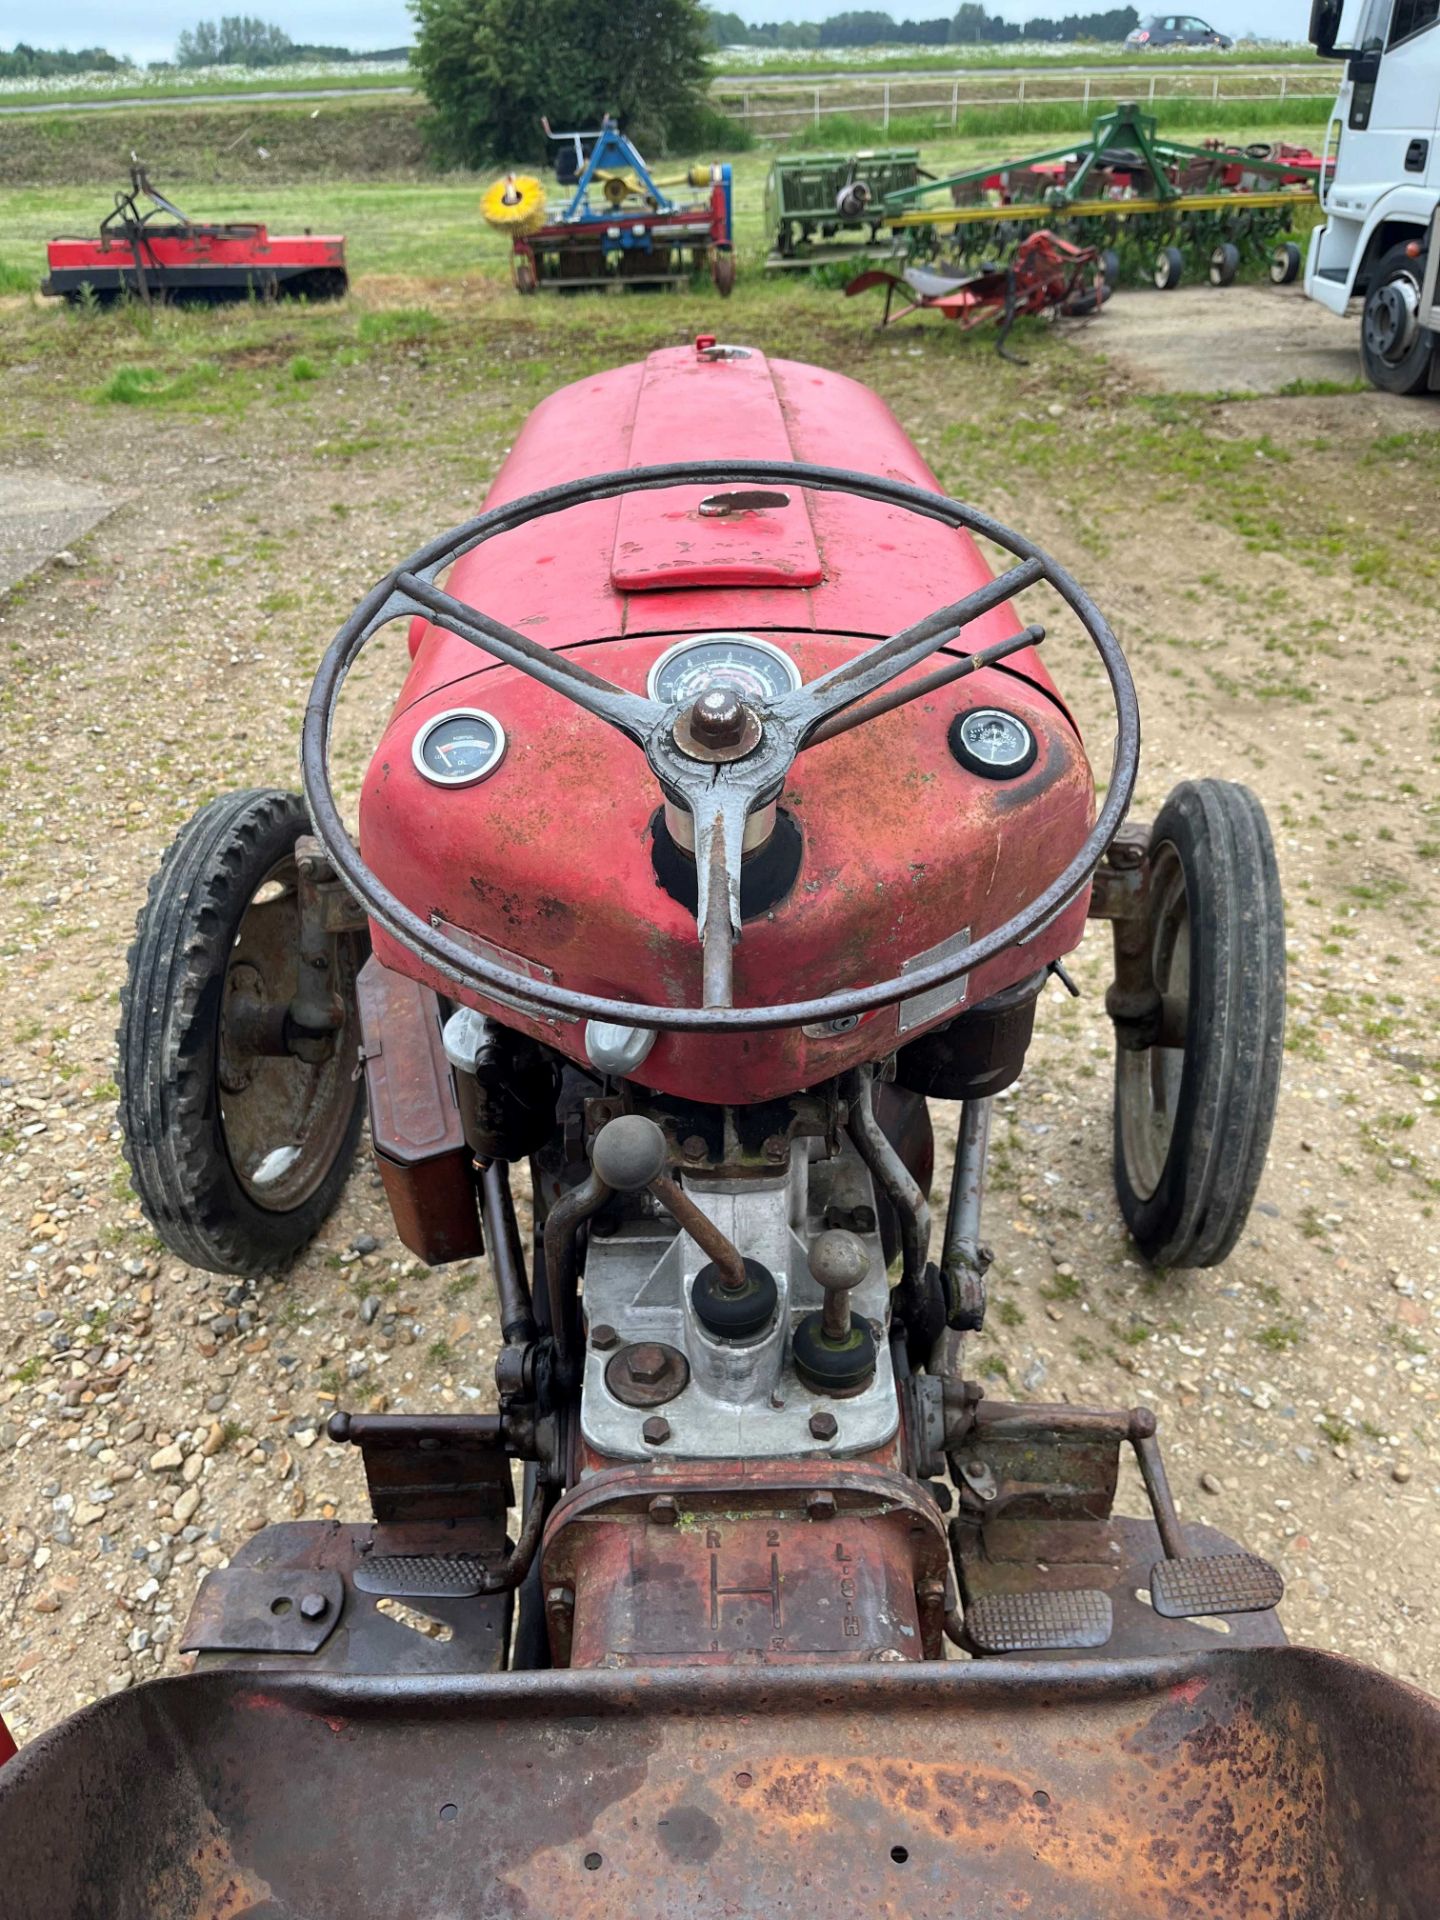 1960 Massey Ferguson 35 orchard tractor, 8000hrs with underslung exhaust system - Image 4 of 5